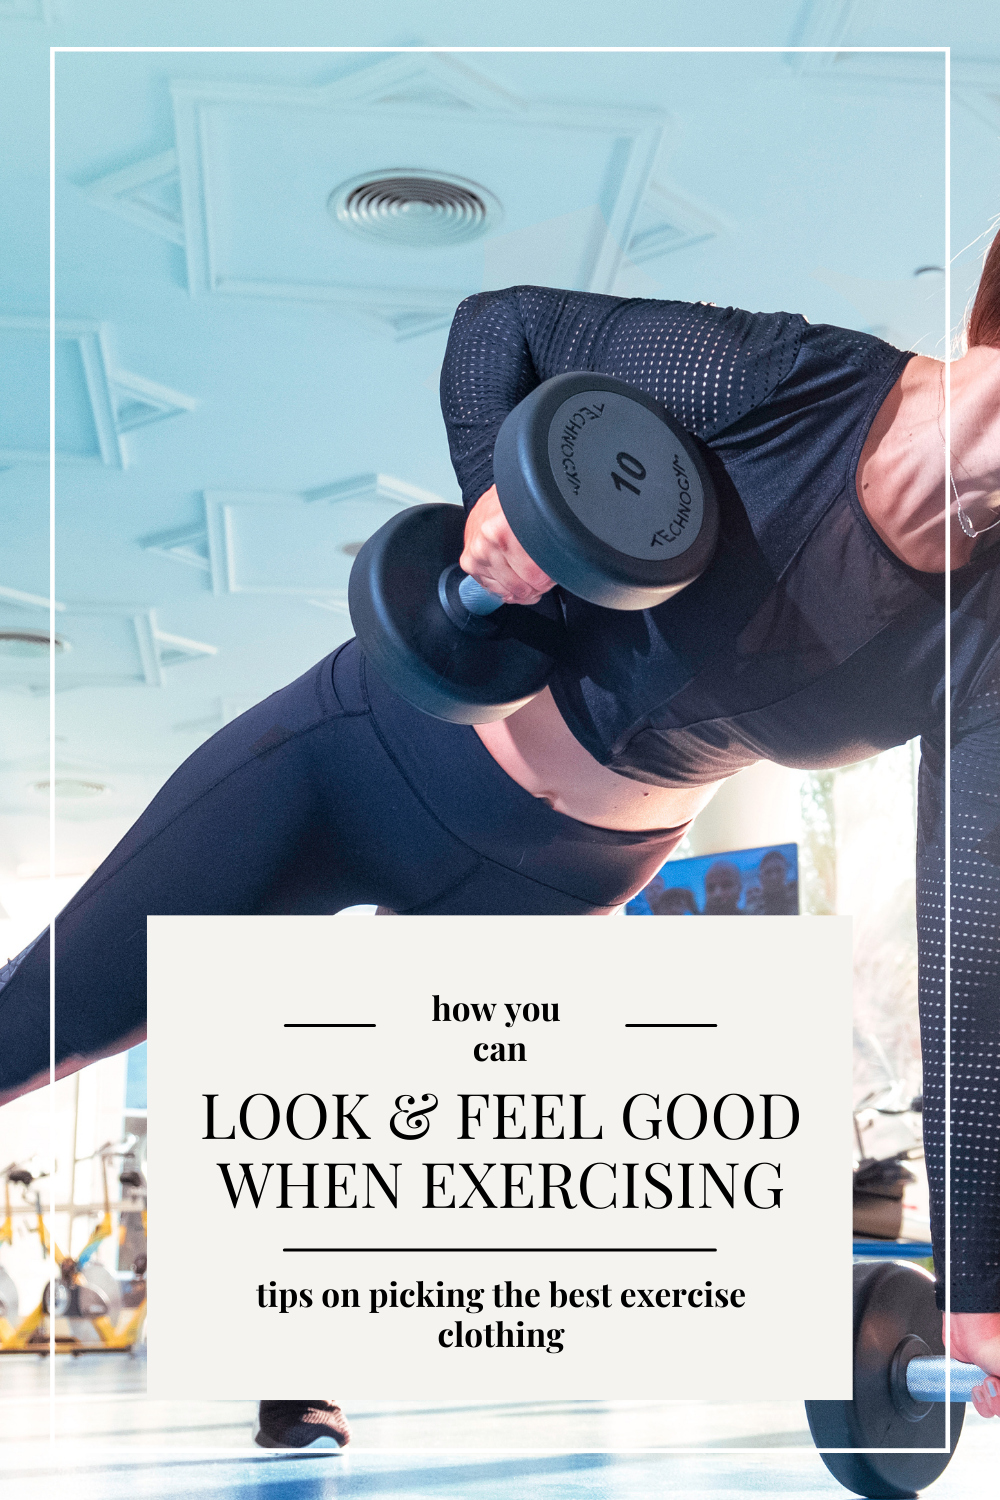 How to Look & Feel Good When Exercising